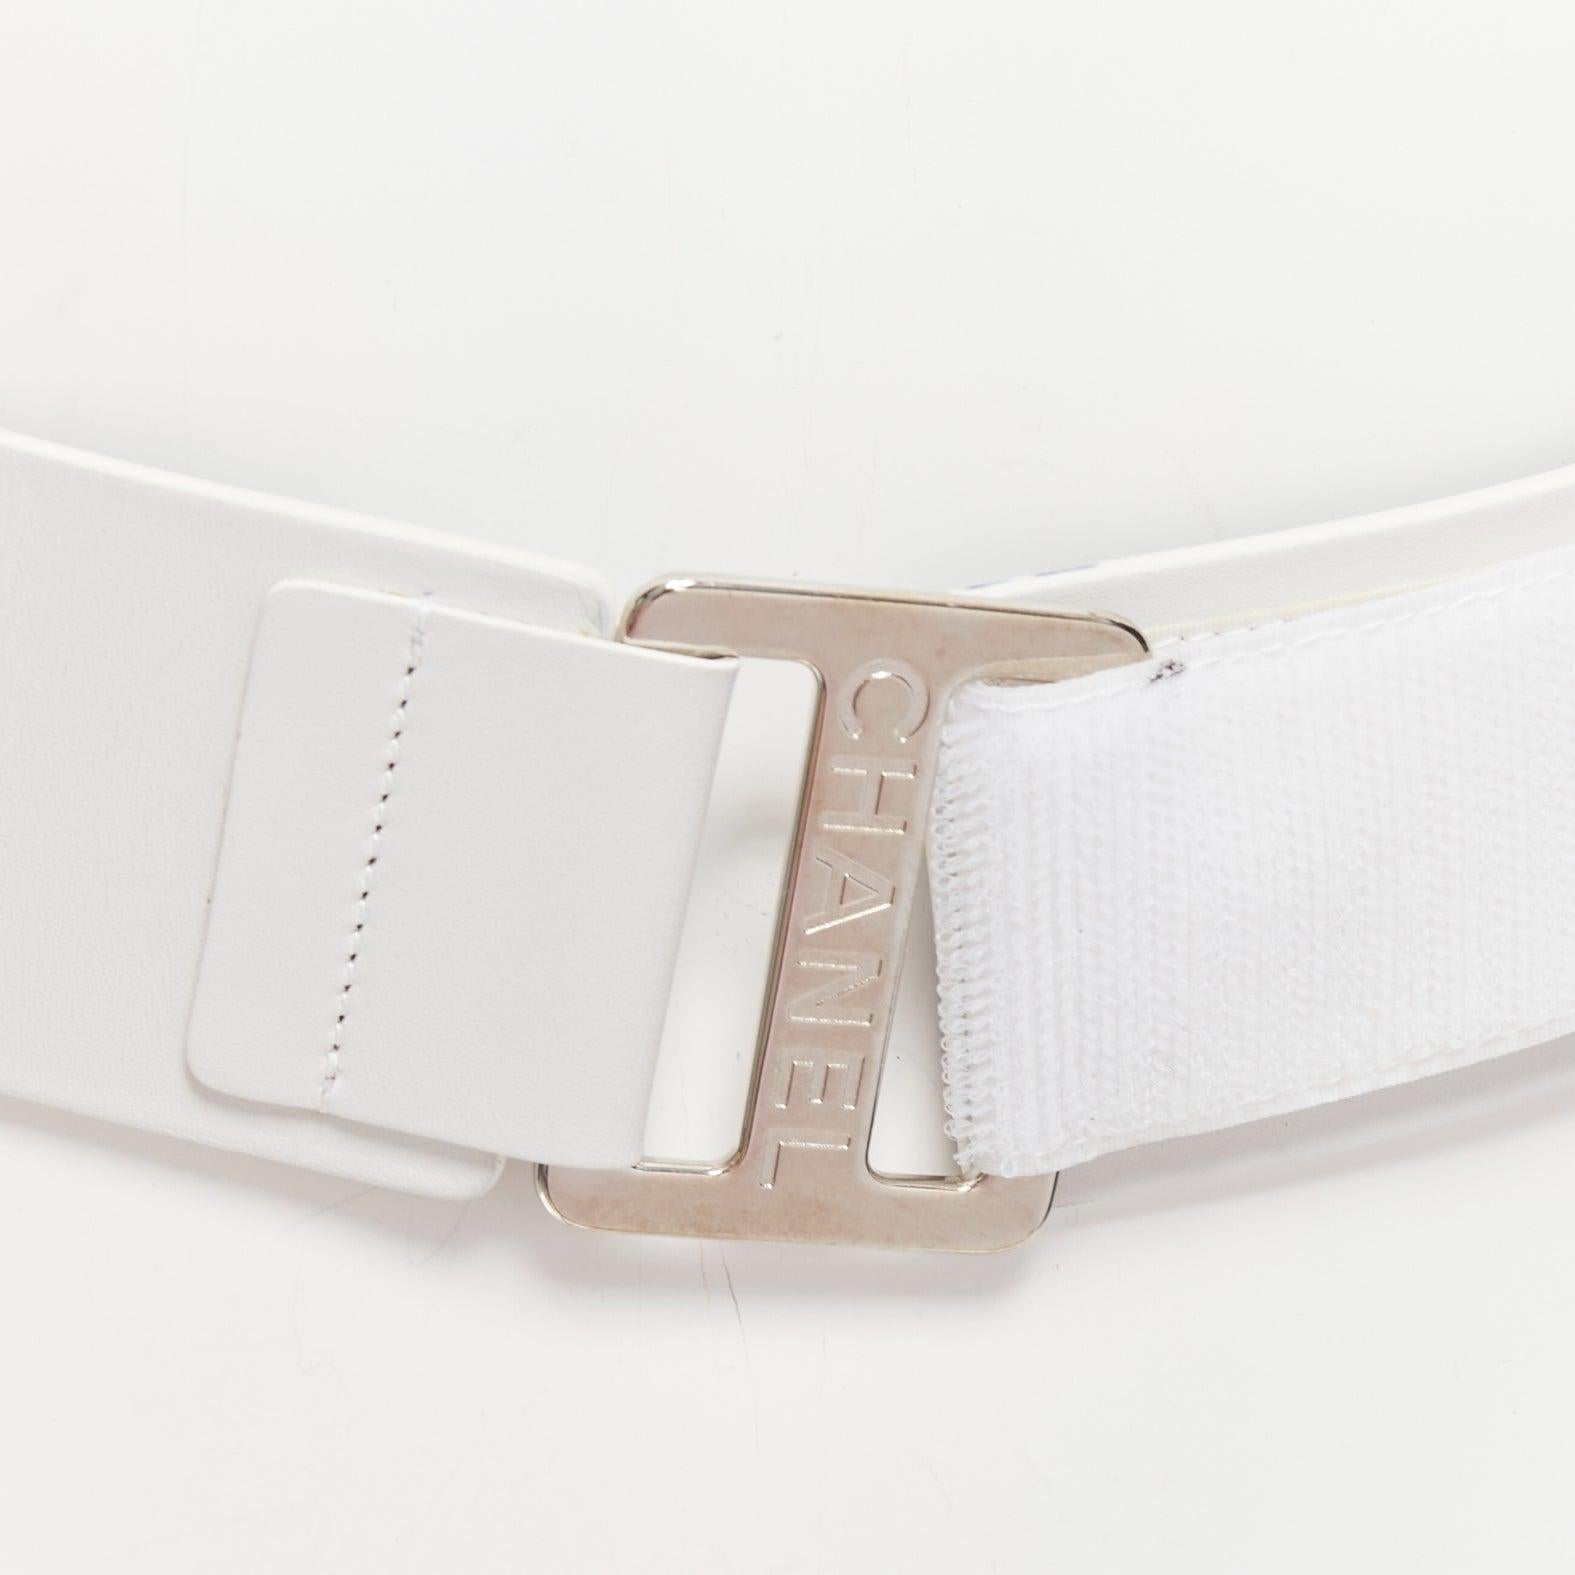 CHANEL B17S white smooth leather silver logo magic tape wide belt 70cm
Reference: AAWC/A01200
Brand: Chanel
Collection: B17S
Material: Leather, Metal
Color: White, Silver
Pattern: Solid
Closure: Magic Tape
Lining: Black Leather
Made in: